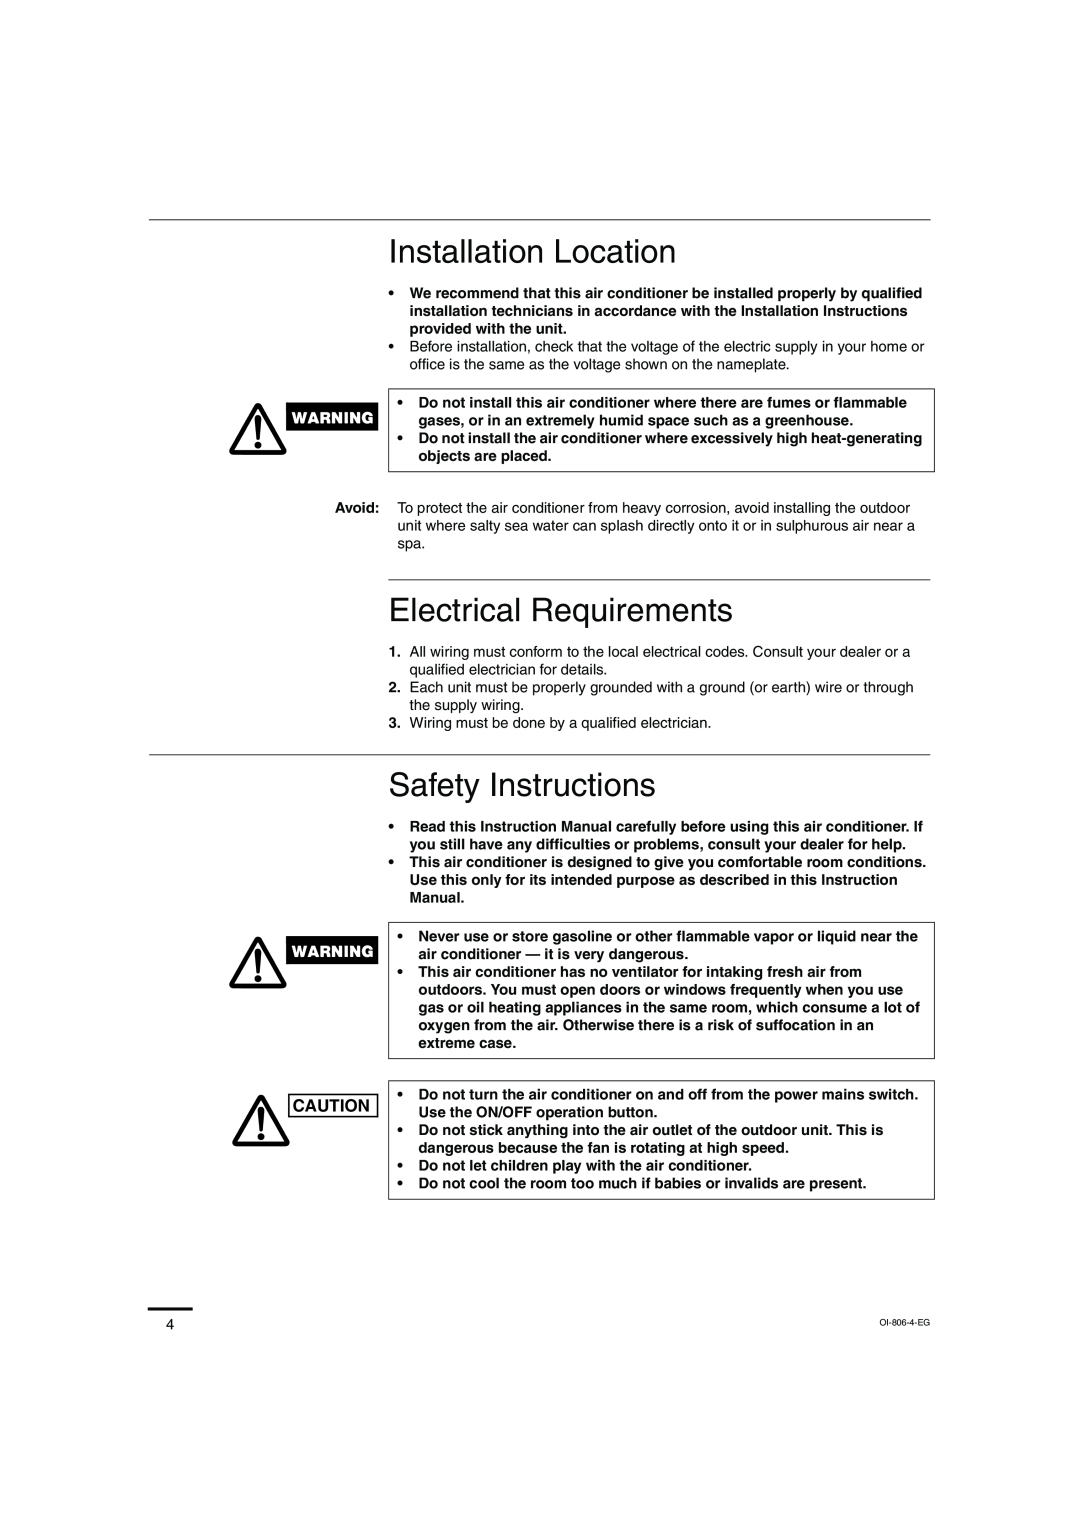 Sanyo KMS0972, KMS1272 instruction manual Installation Location, Electrical Requirements, Safety Instructions 